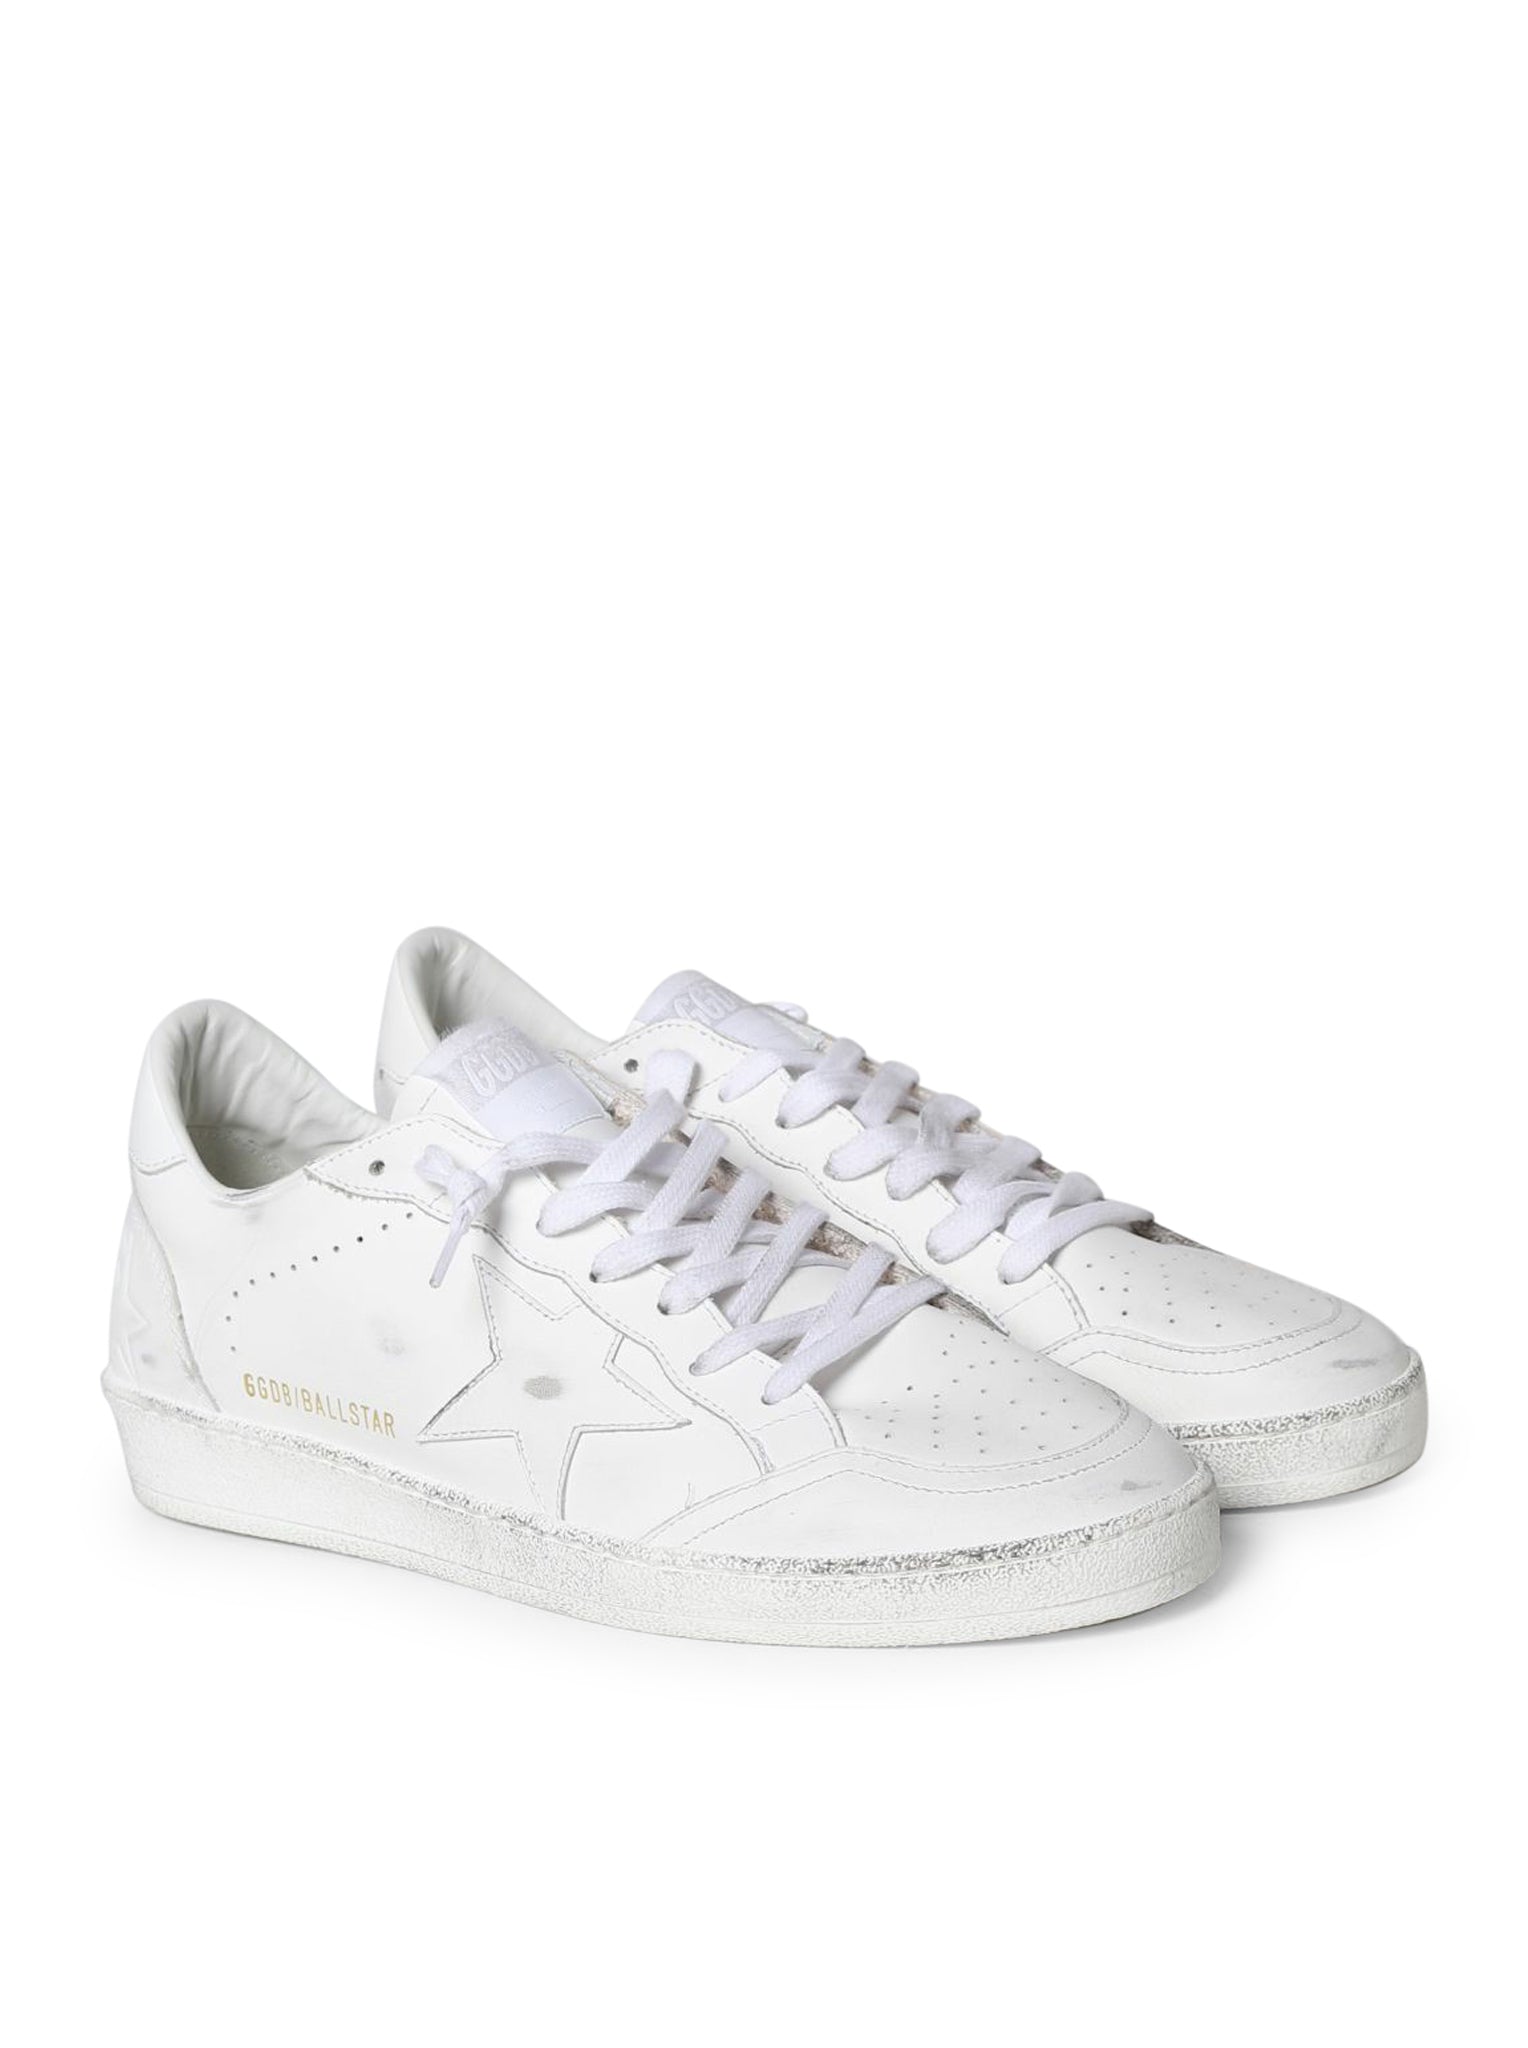 Ball Star Golden Goose sneakers in used leather